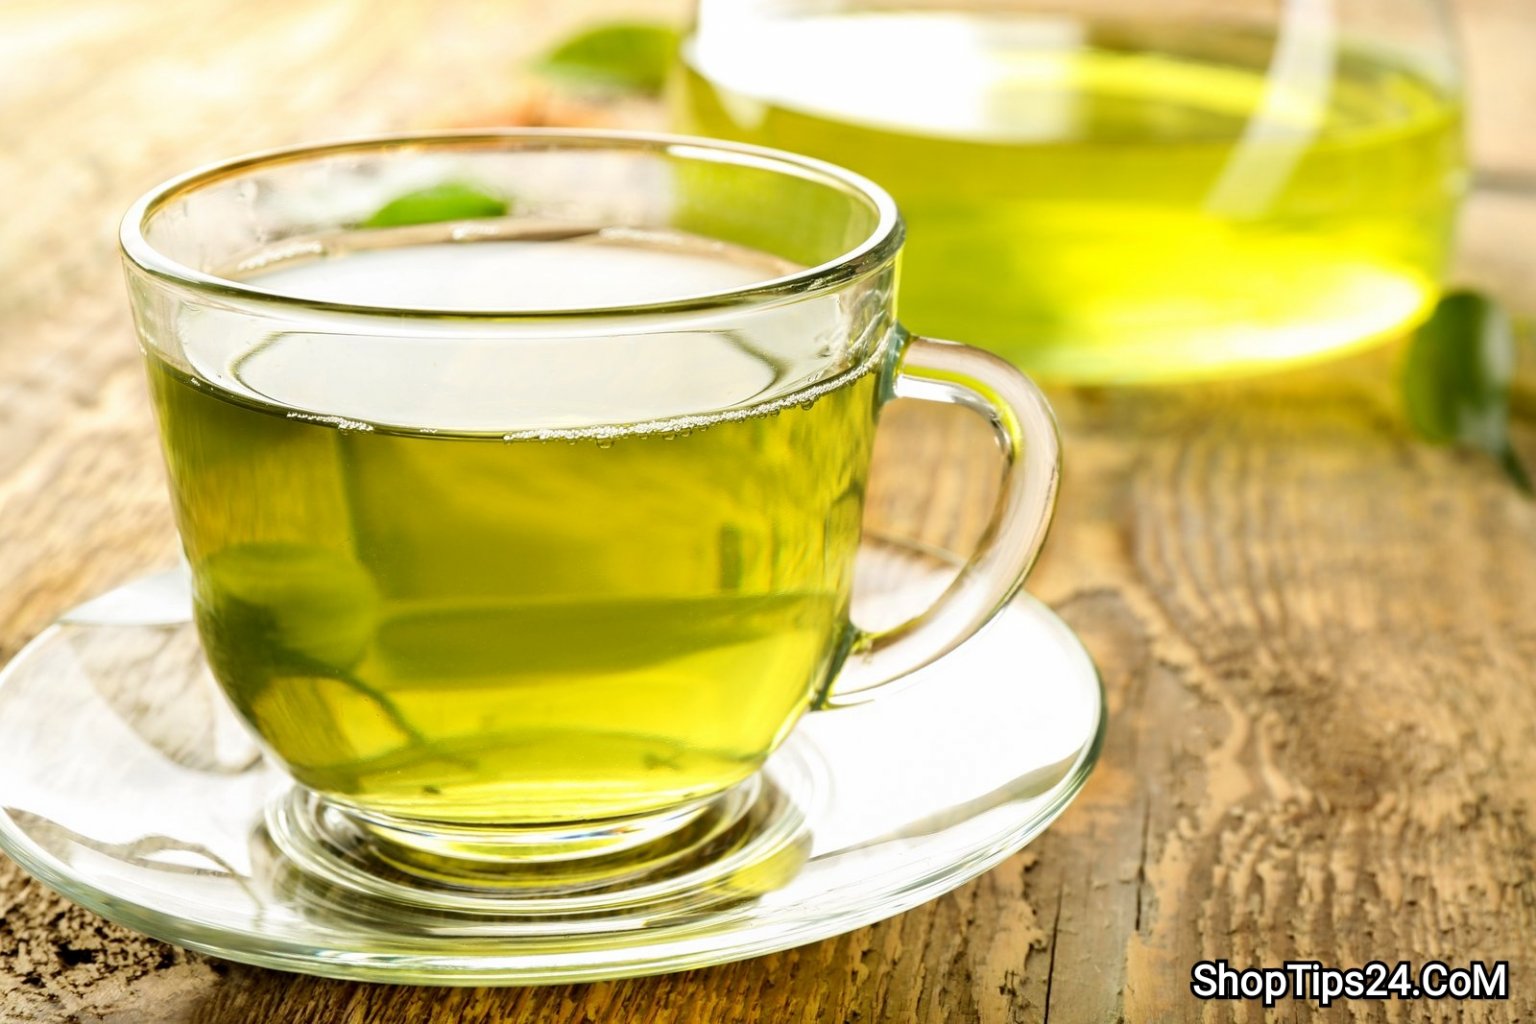 Green tea shot recipe: There is no tea in the green tea shot recipe. SHOPTIPS24.CoM